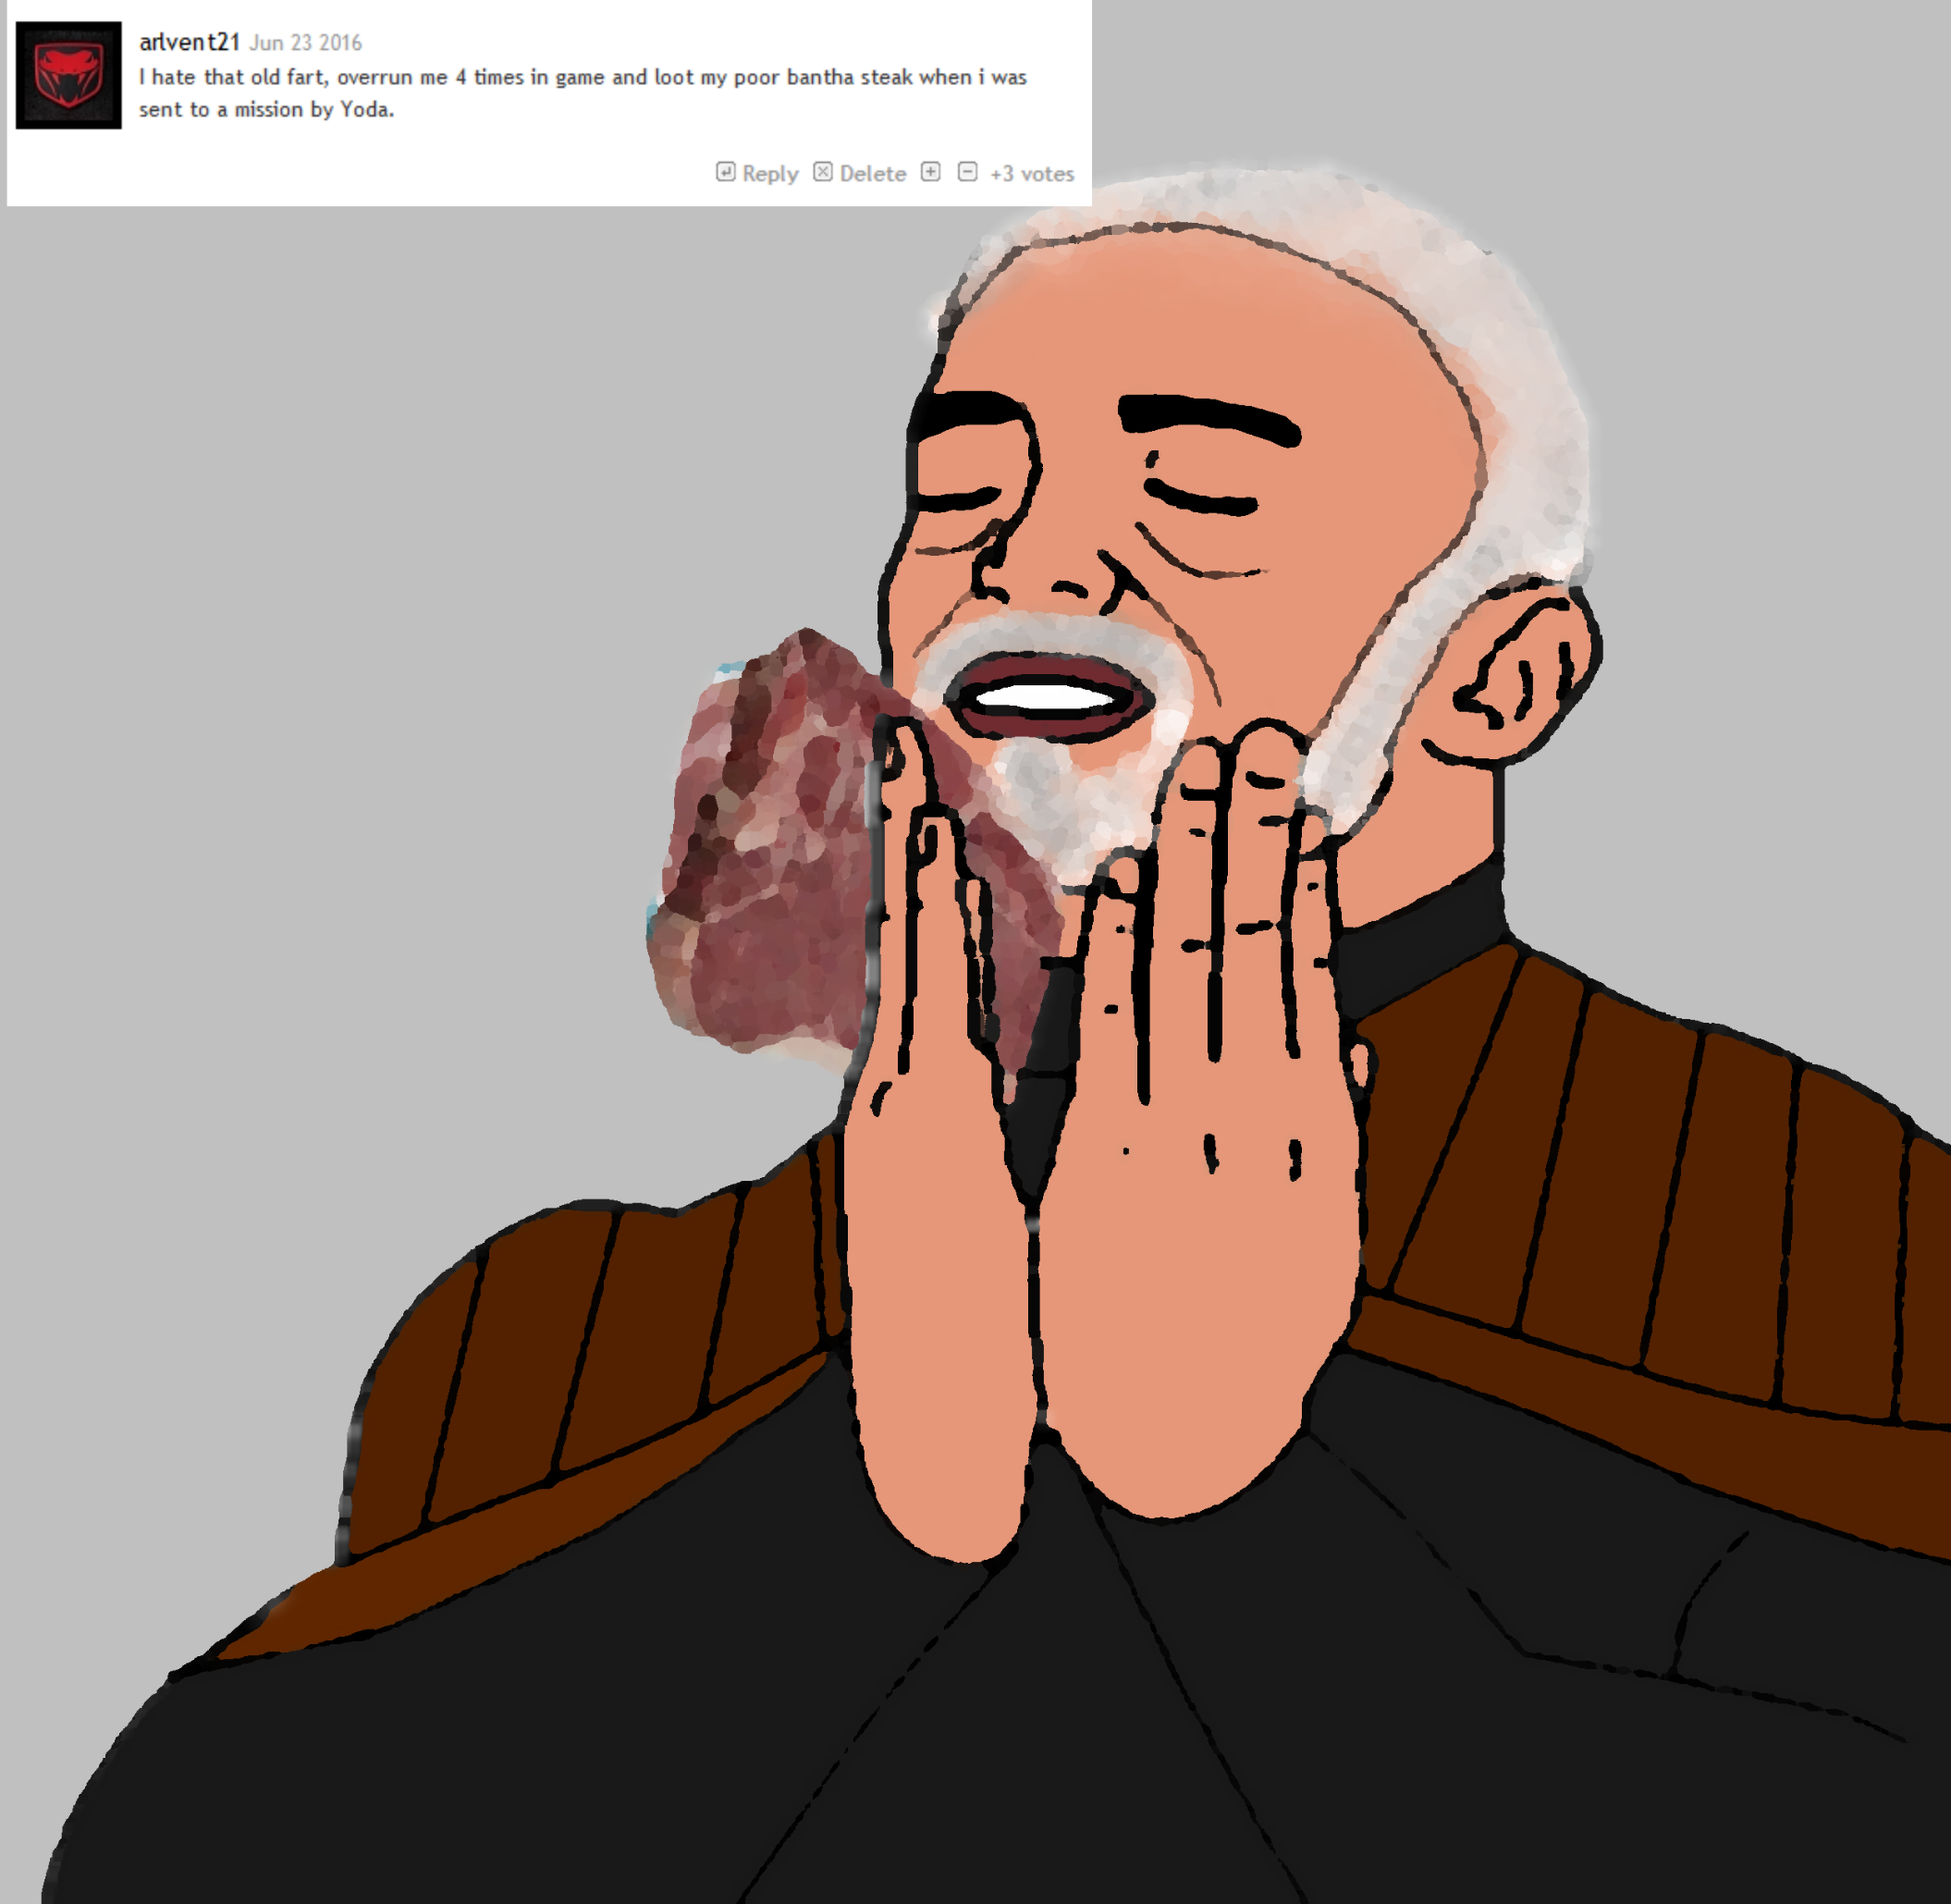 Count Dooku likes Bantha steak. image - Clone Wars Conquest mod for